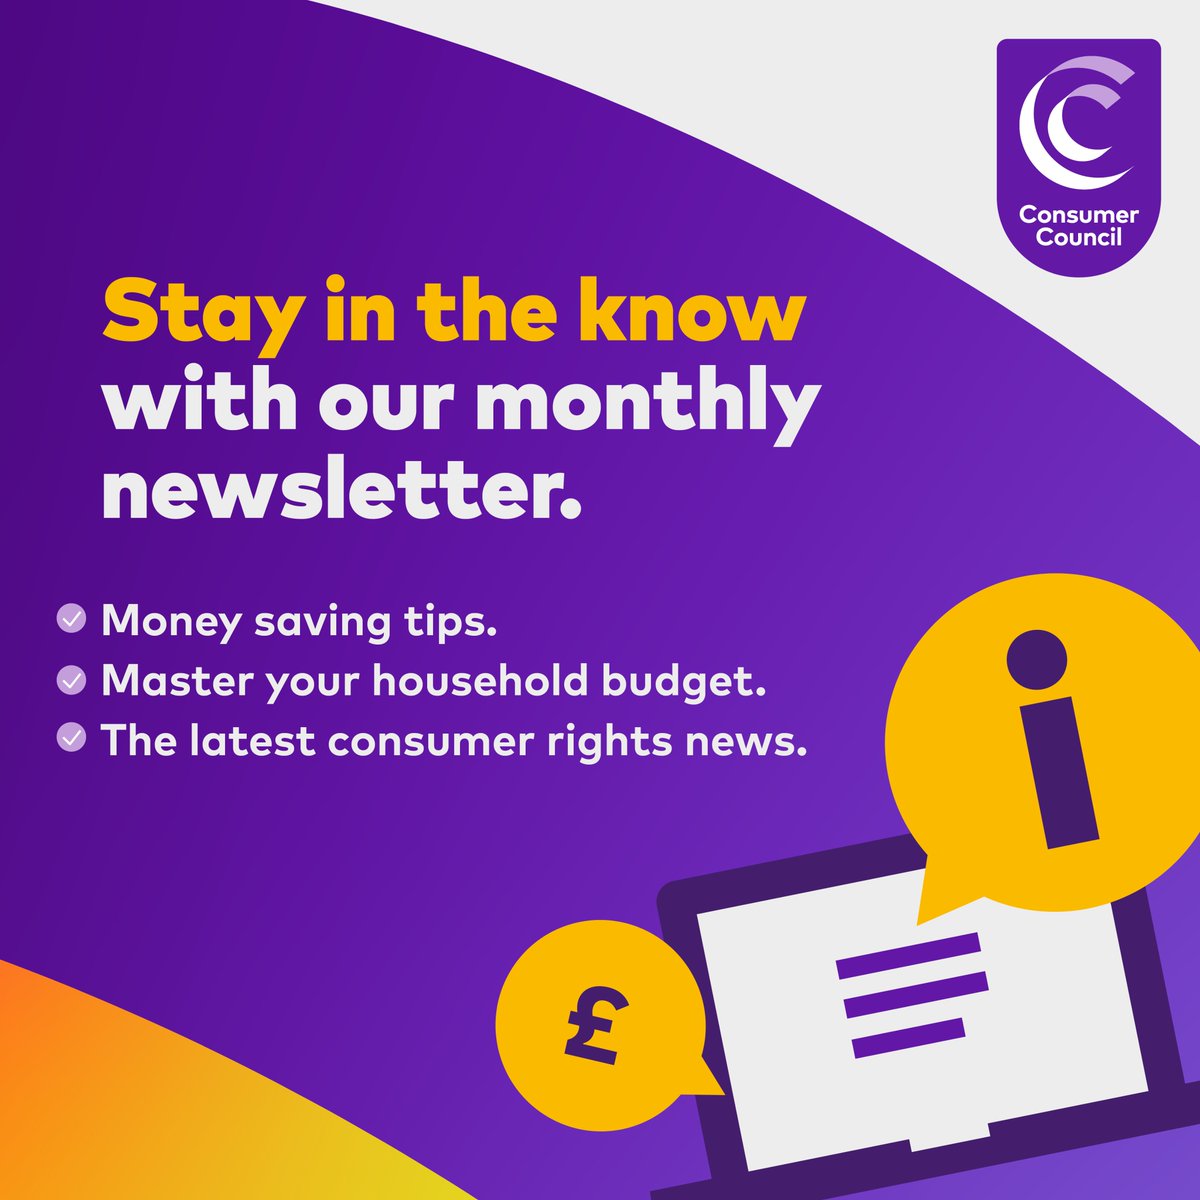 📨Our consumer newsletter is out next week! We will send the latest consumer rights information, money-saving tips and budgeting advice straight to your inbox. Sign up now 👉 bit.ly/3I2jY8Y